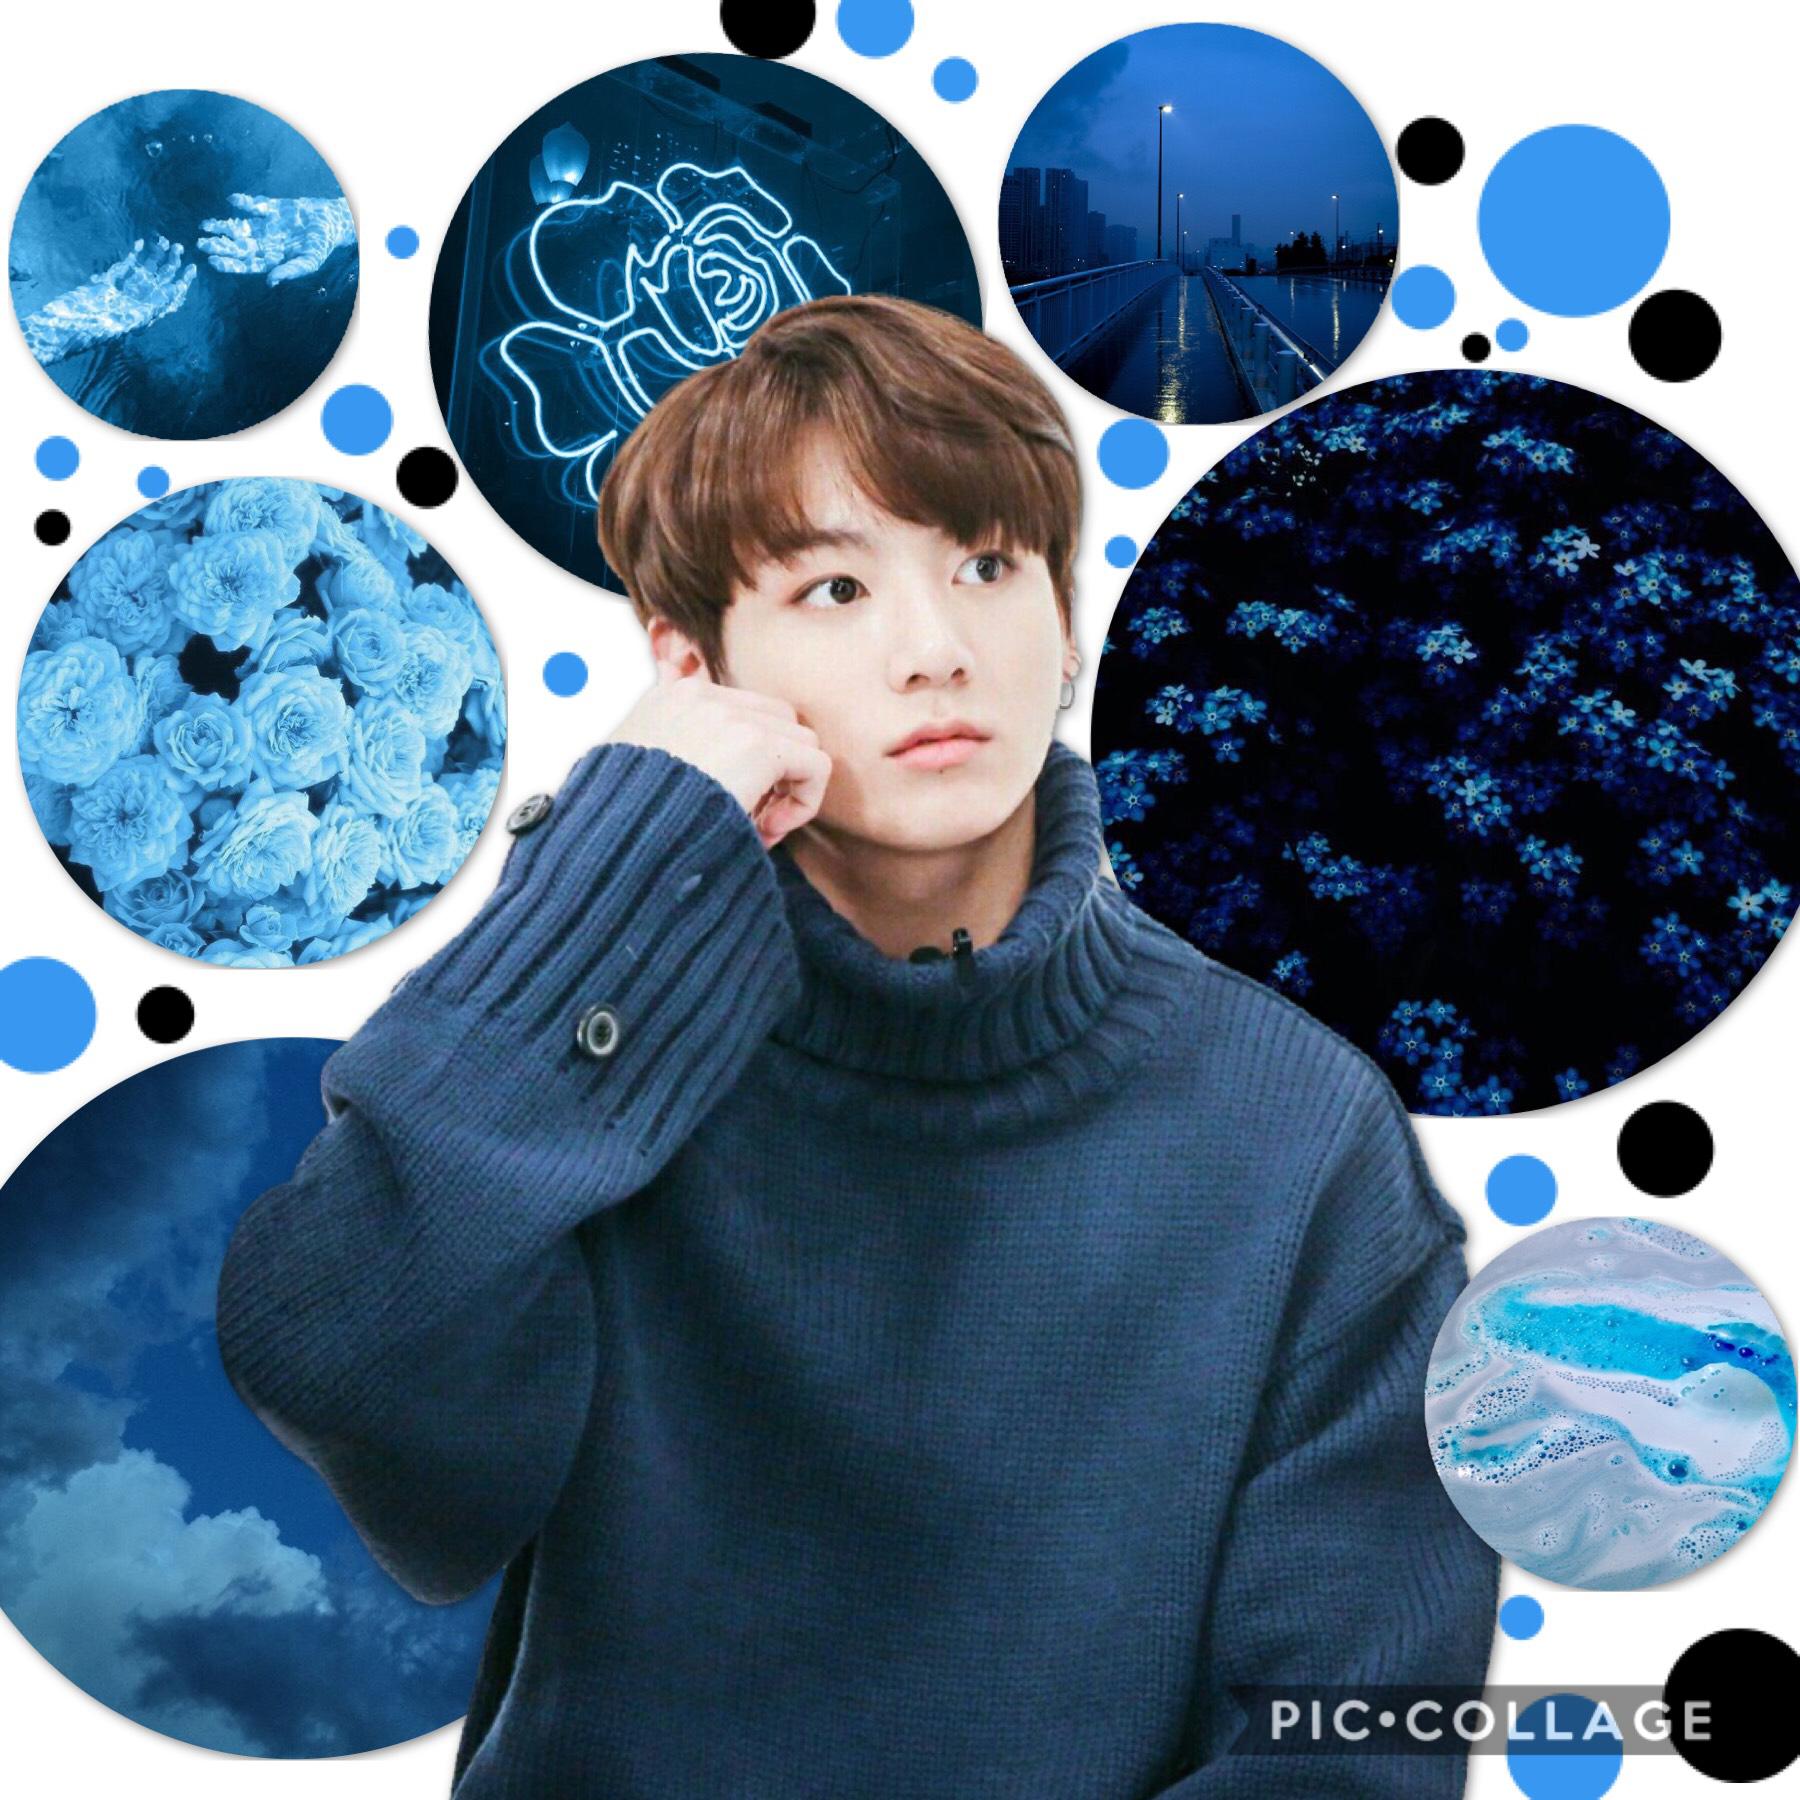 thank u so much everyone for all the love and support! we made oofsehun leave 😁😁 well here is a jungkook collage 🐰💙 #jungkook #jeon jungkook #jeongguk #bangtan #bts #blue aesthetic #kpop